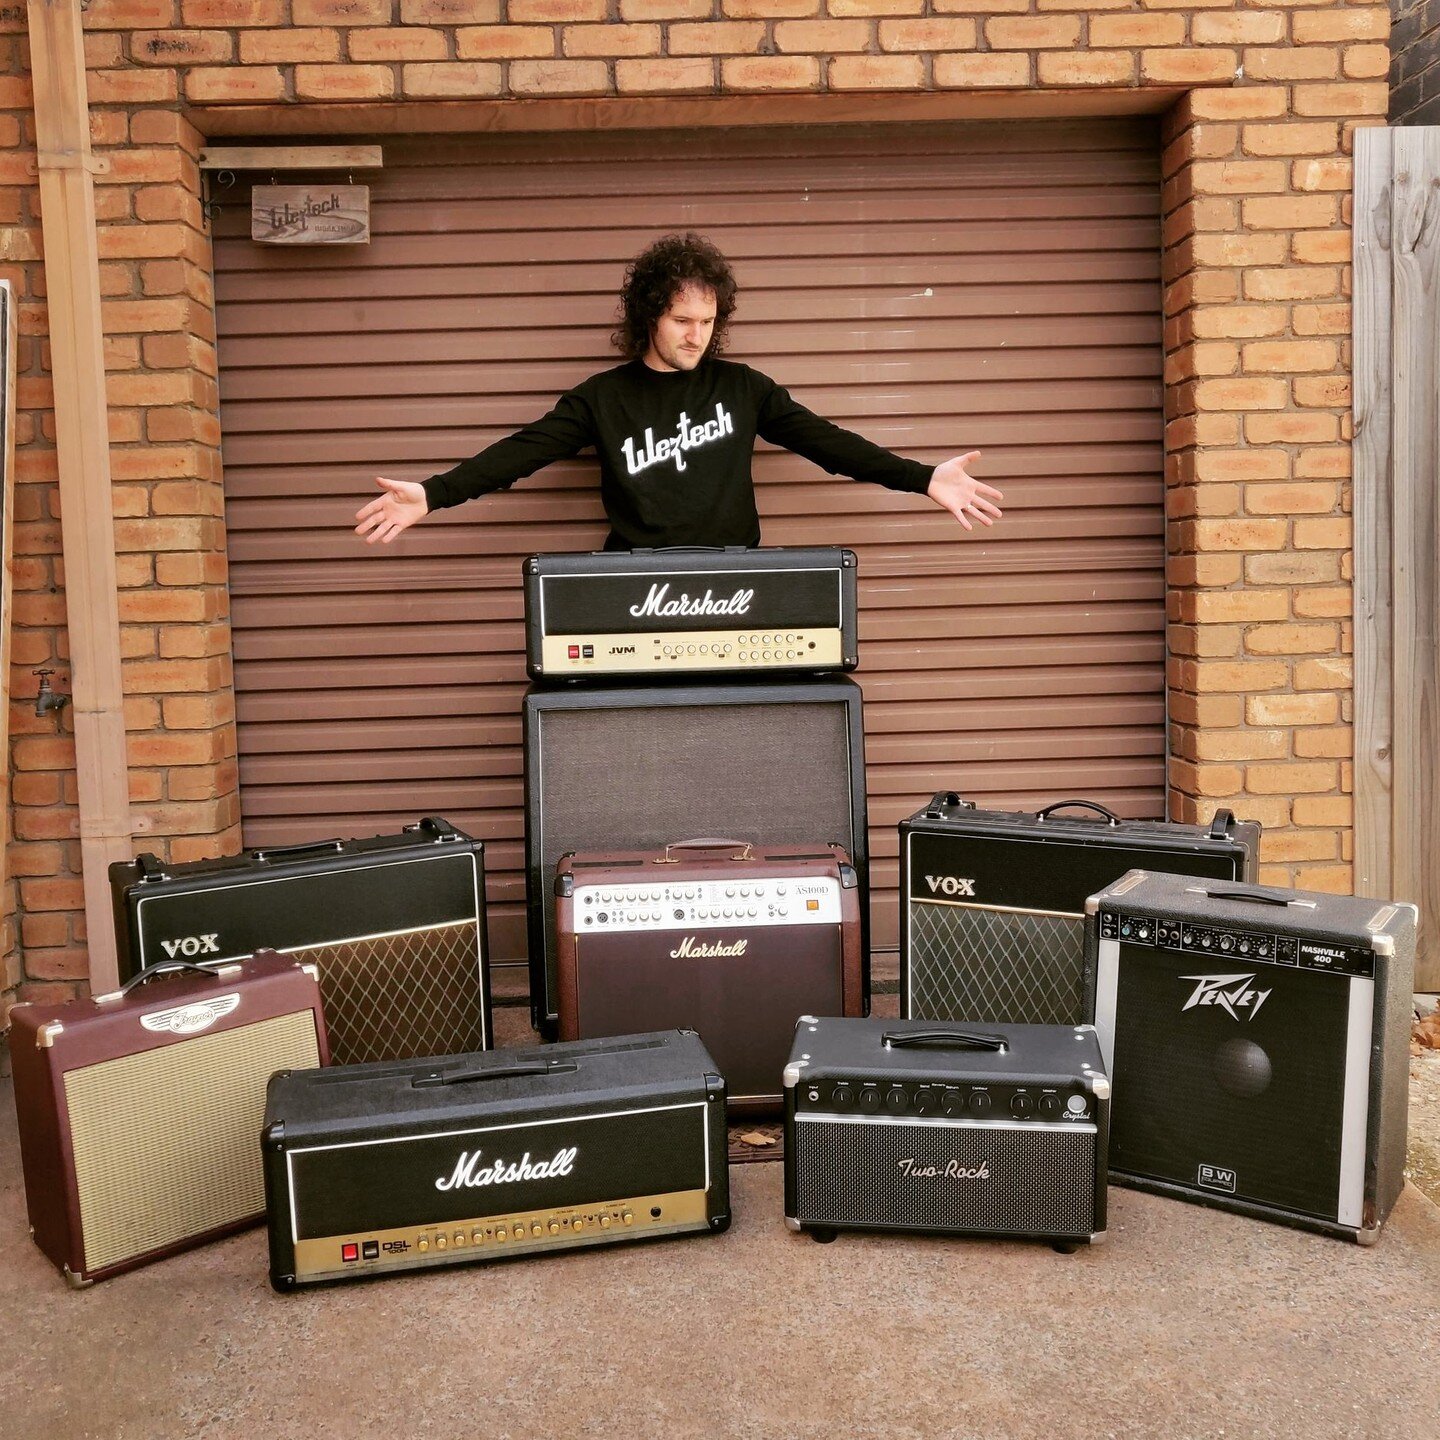 Mammoth effort at Weztech this past week getting all these amps out the door. A wide range of brands and models and issues varying from simple to challenging. Good to have some more space in the shop. 💪
.
📻 Vox AC30 C2X
📻 Vox AC30 CC2X
📻 Marshall